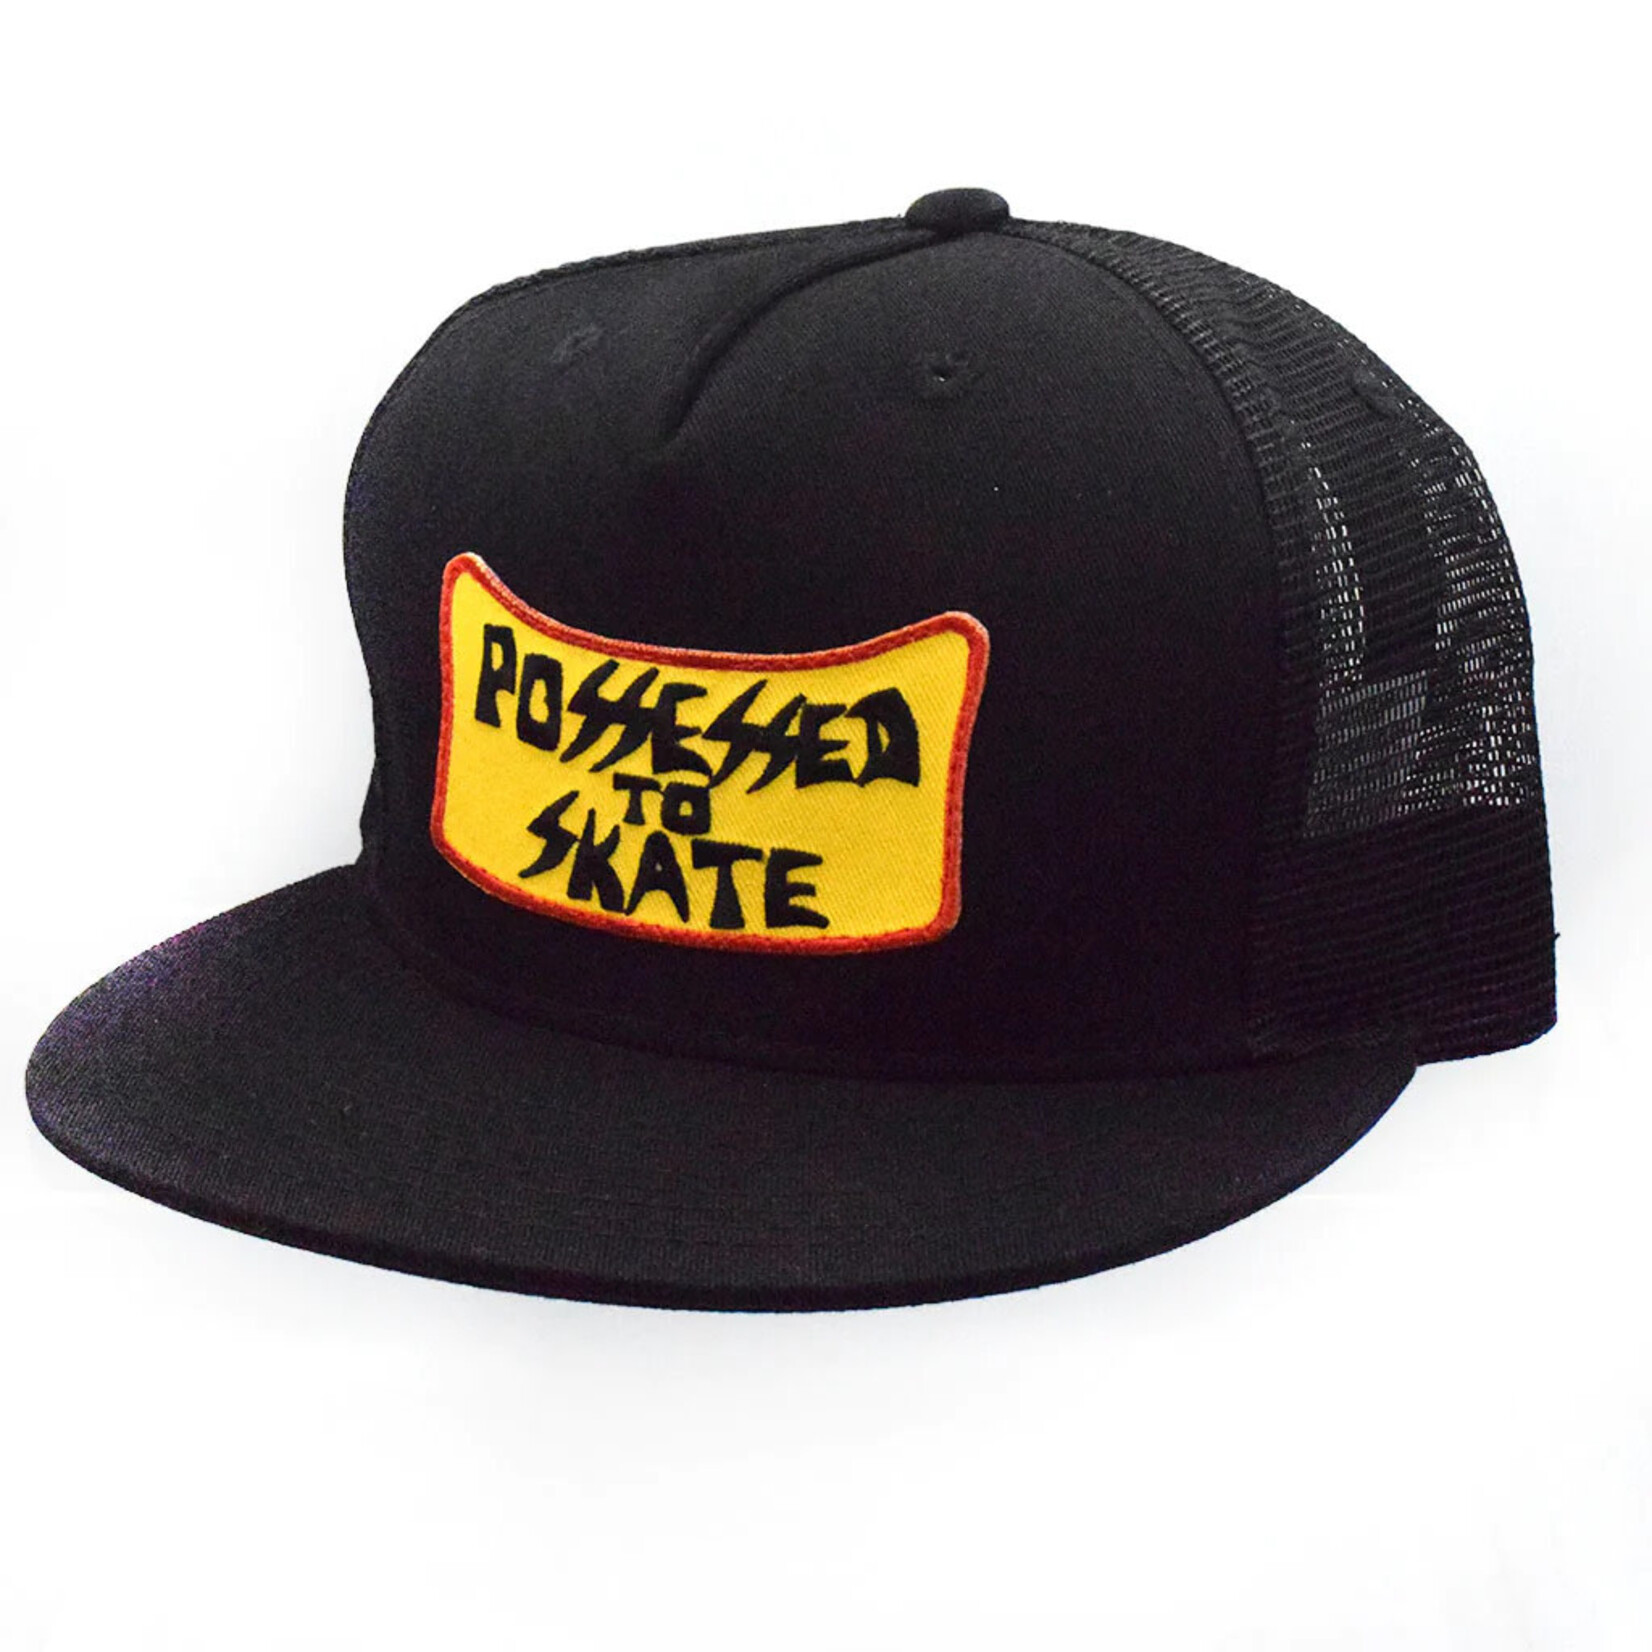 Dogtown Suicidal Skates Possessed to Skate Patch Mesh Hat - Black